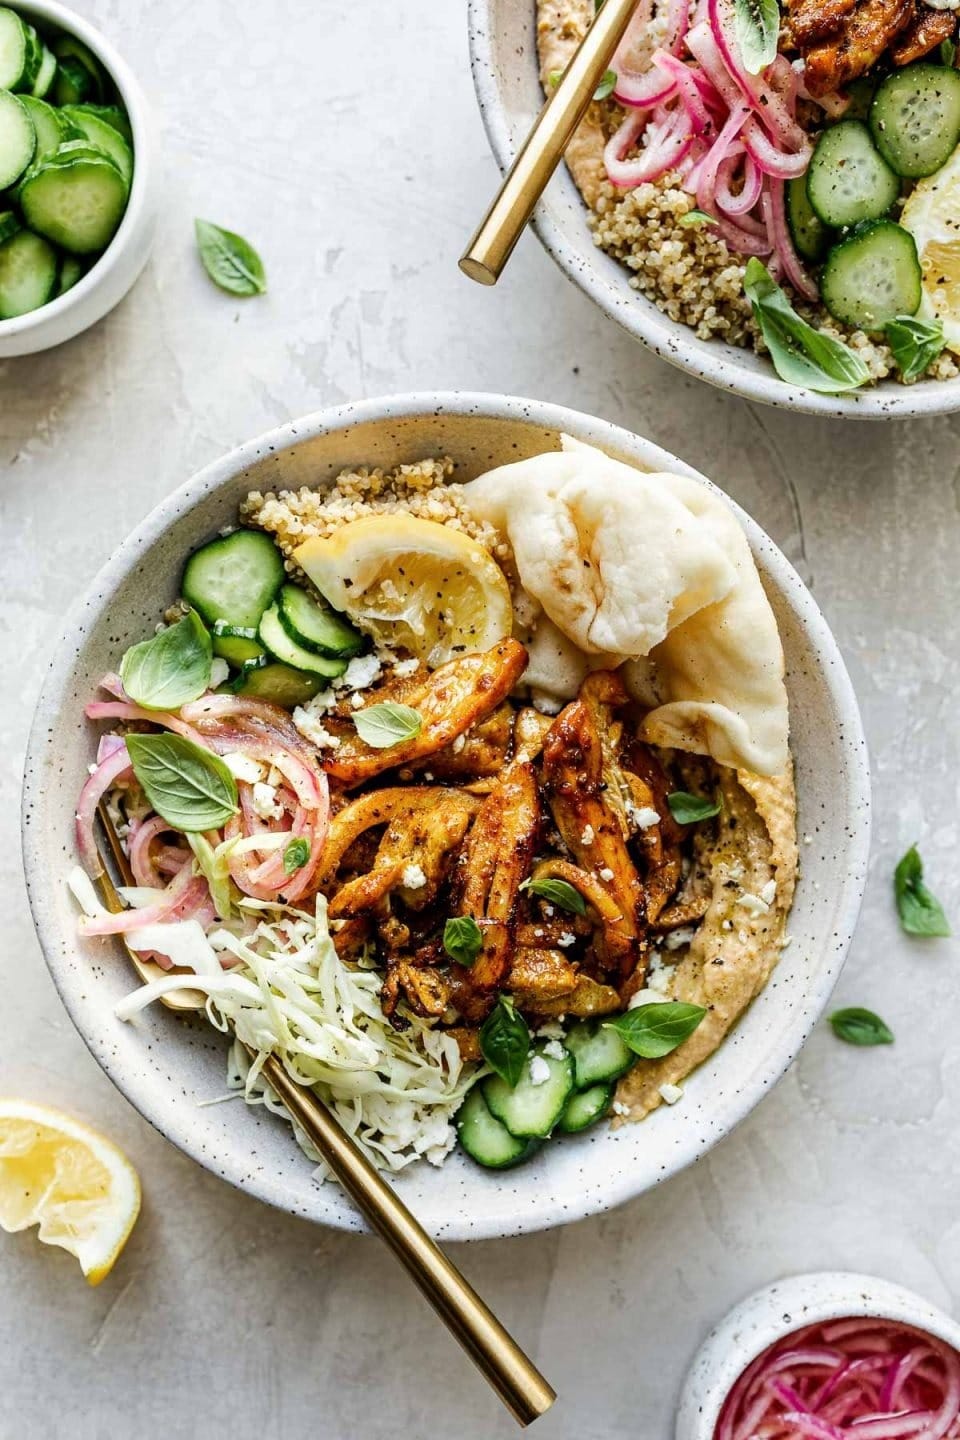 Chicken and hummus salad in a bowl made with fluffy grains, creamy hummus, seasoned chicken, and crunchy veggies. 